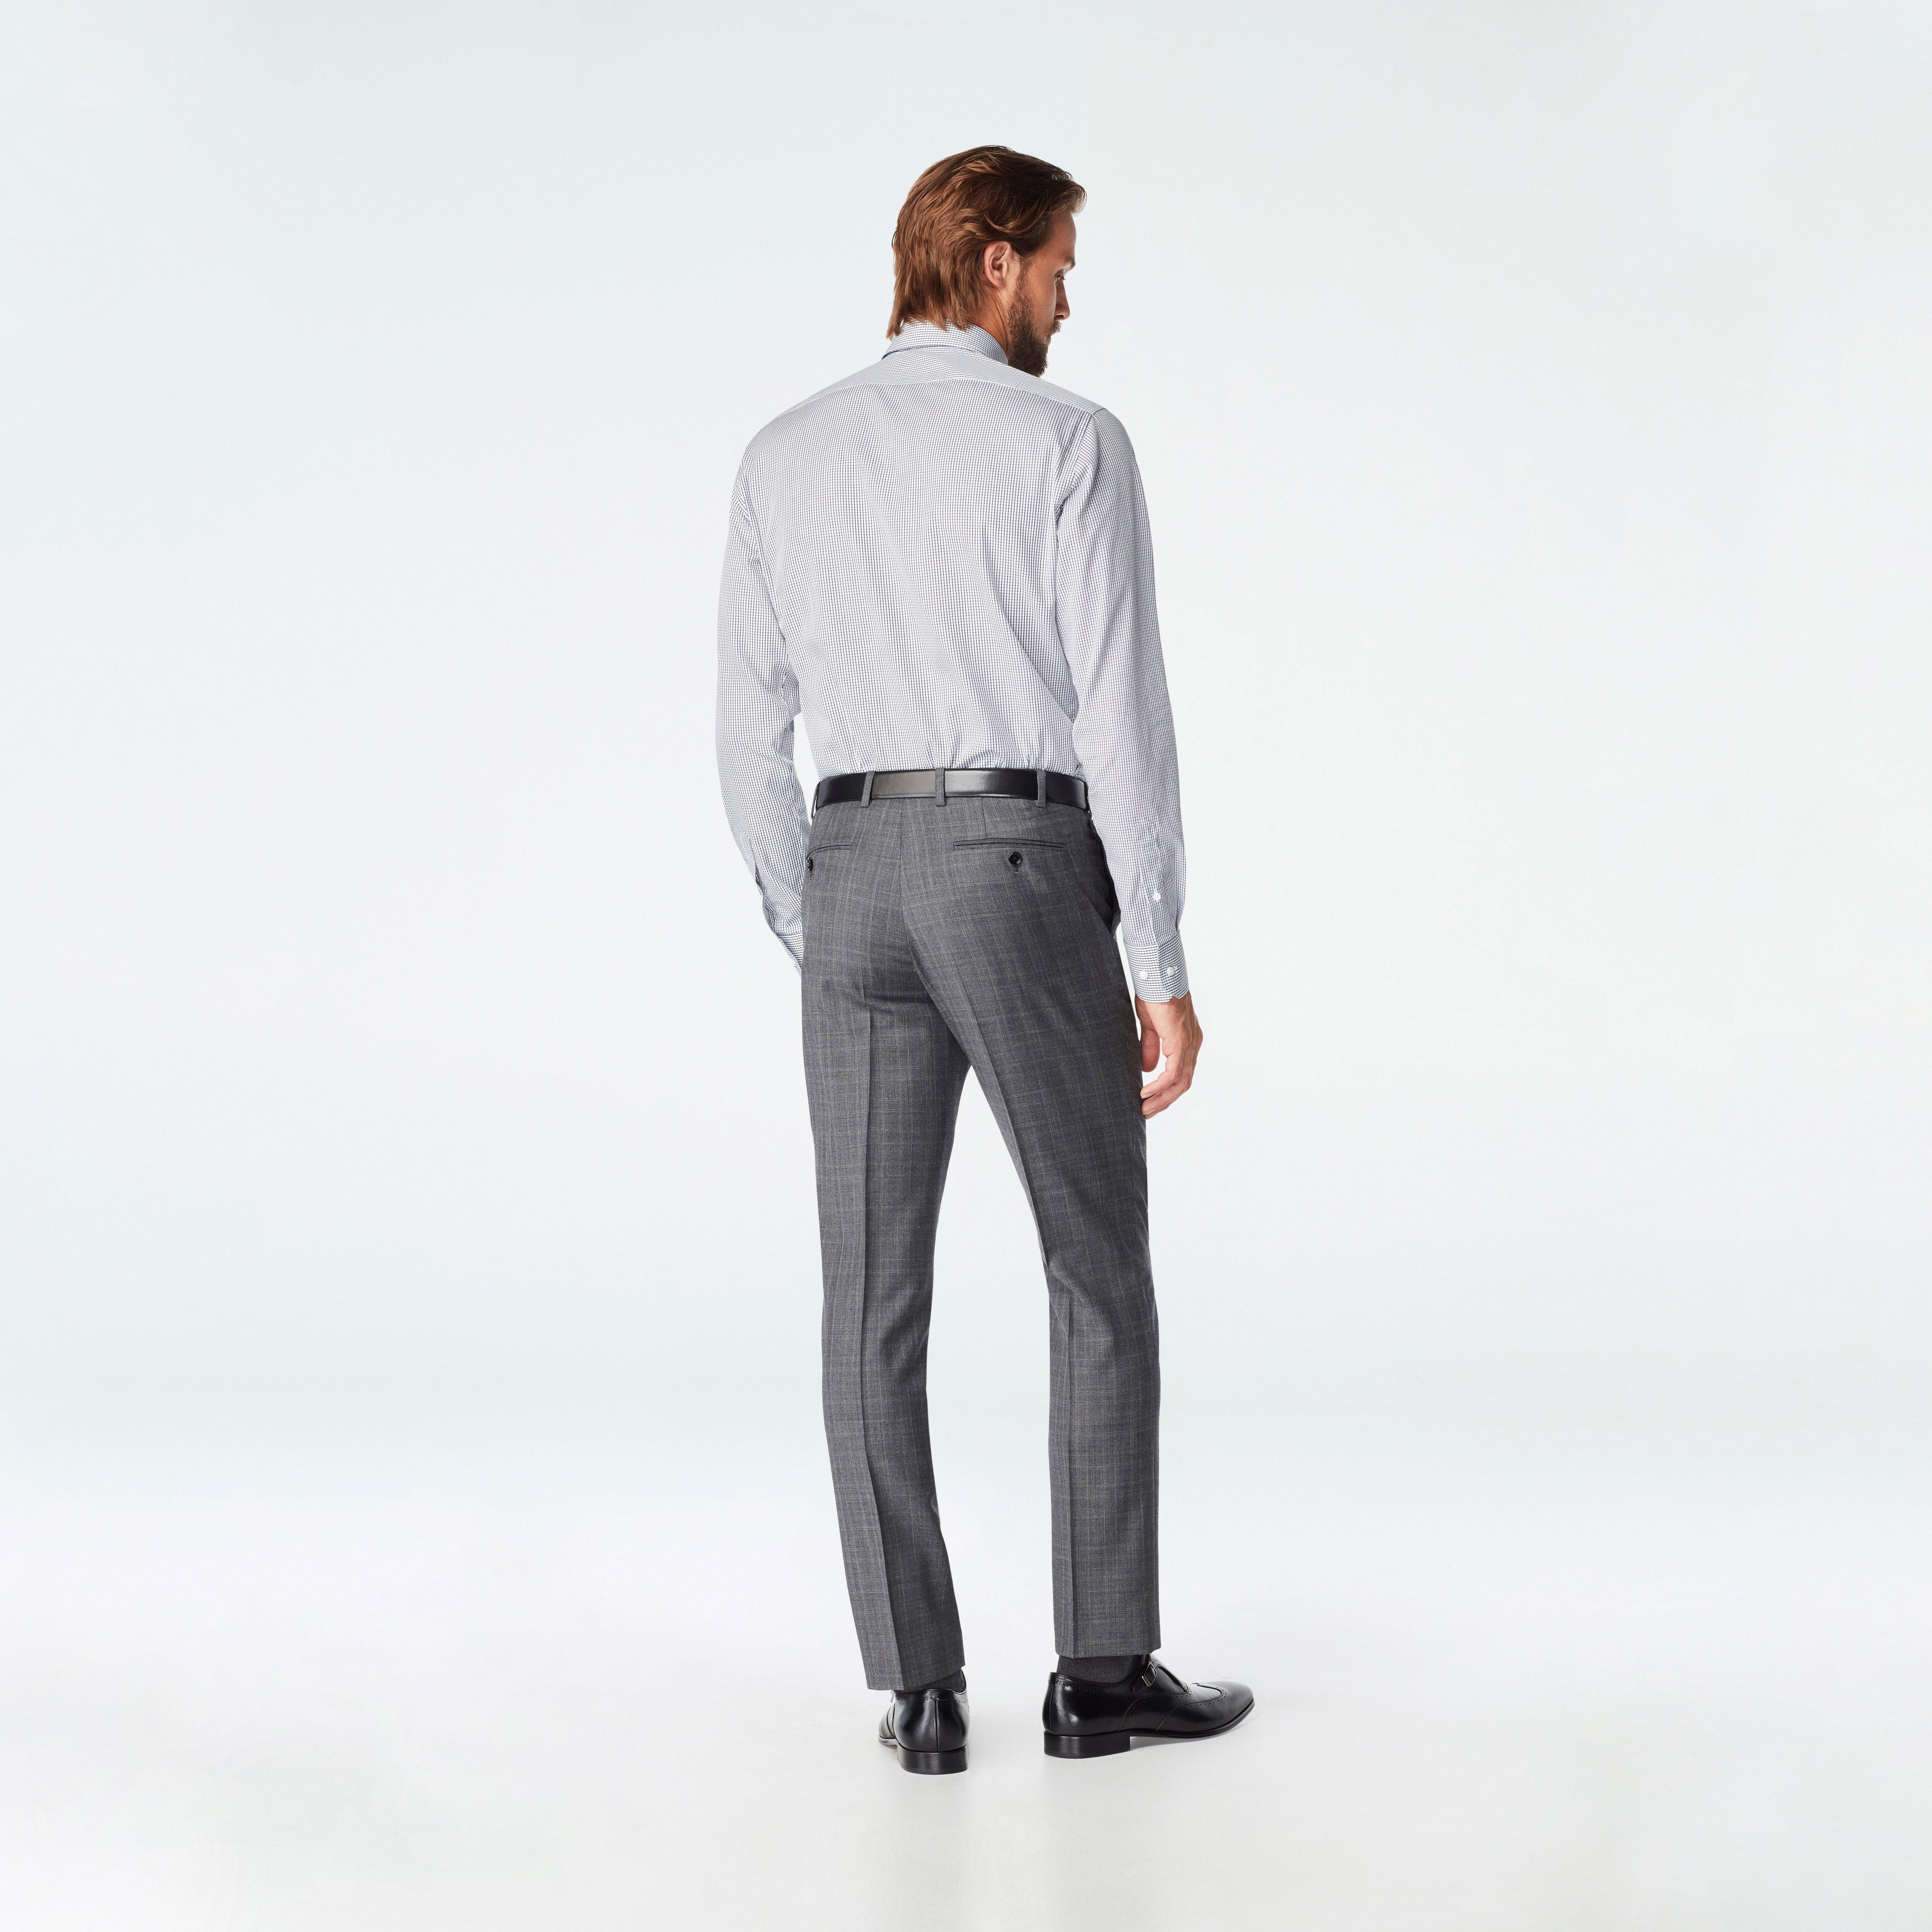 Custom Suits Made For You - Harrogate Glen Check Charcoal Suit | INDOCHINO